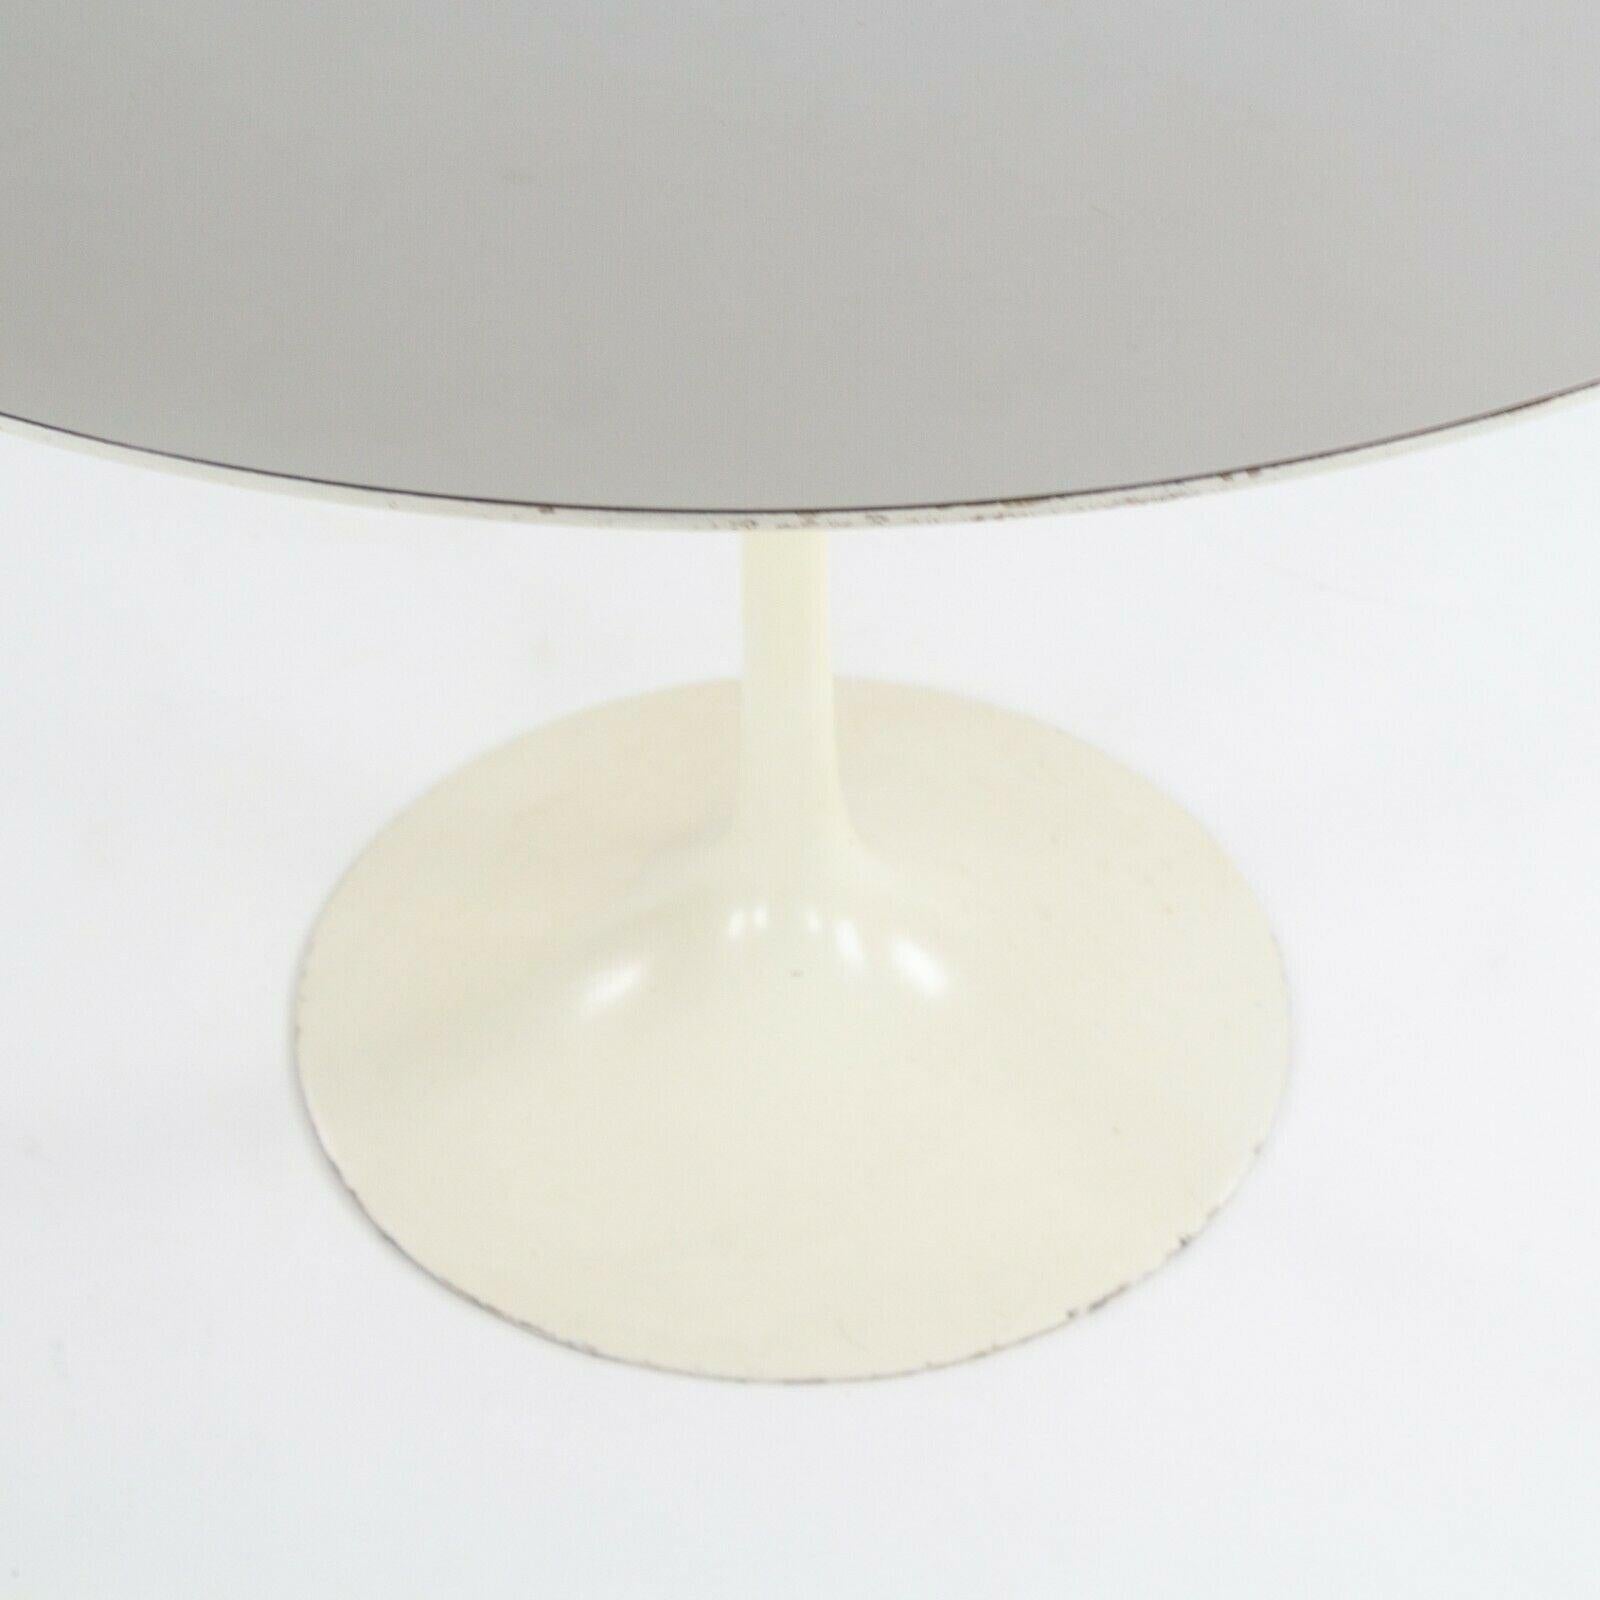 Modern 1960s Eero Saarinen for Knoll Tulip Dining Table & Four White Tulip Side Chairs For Sale